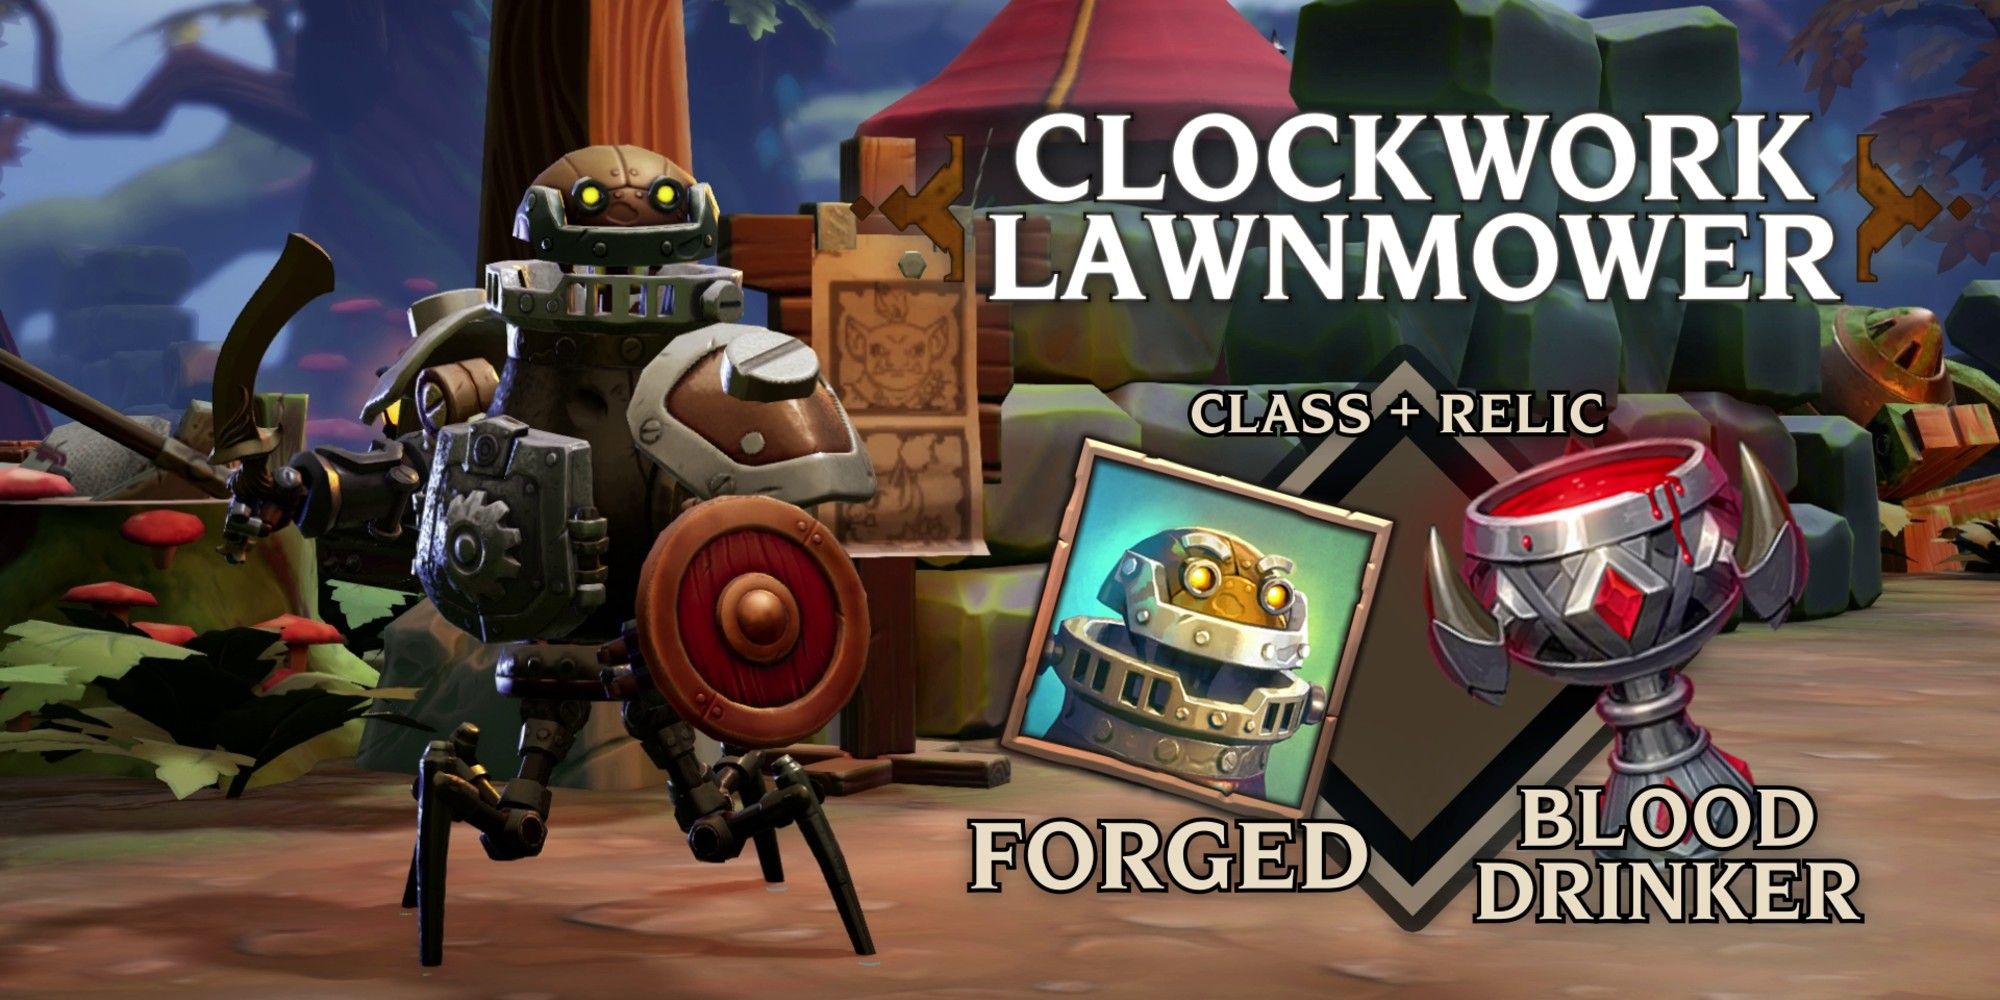 The build for the Clockwork Lawnmower in Torchlight 3